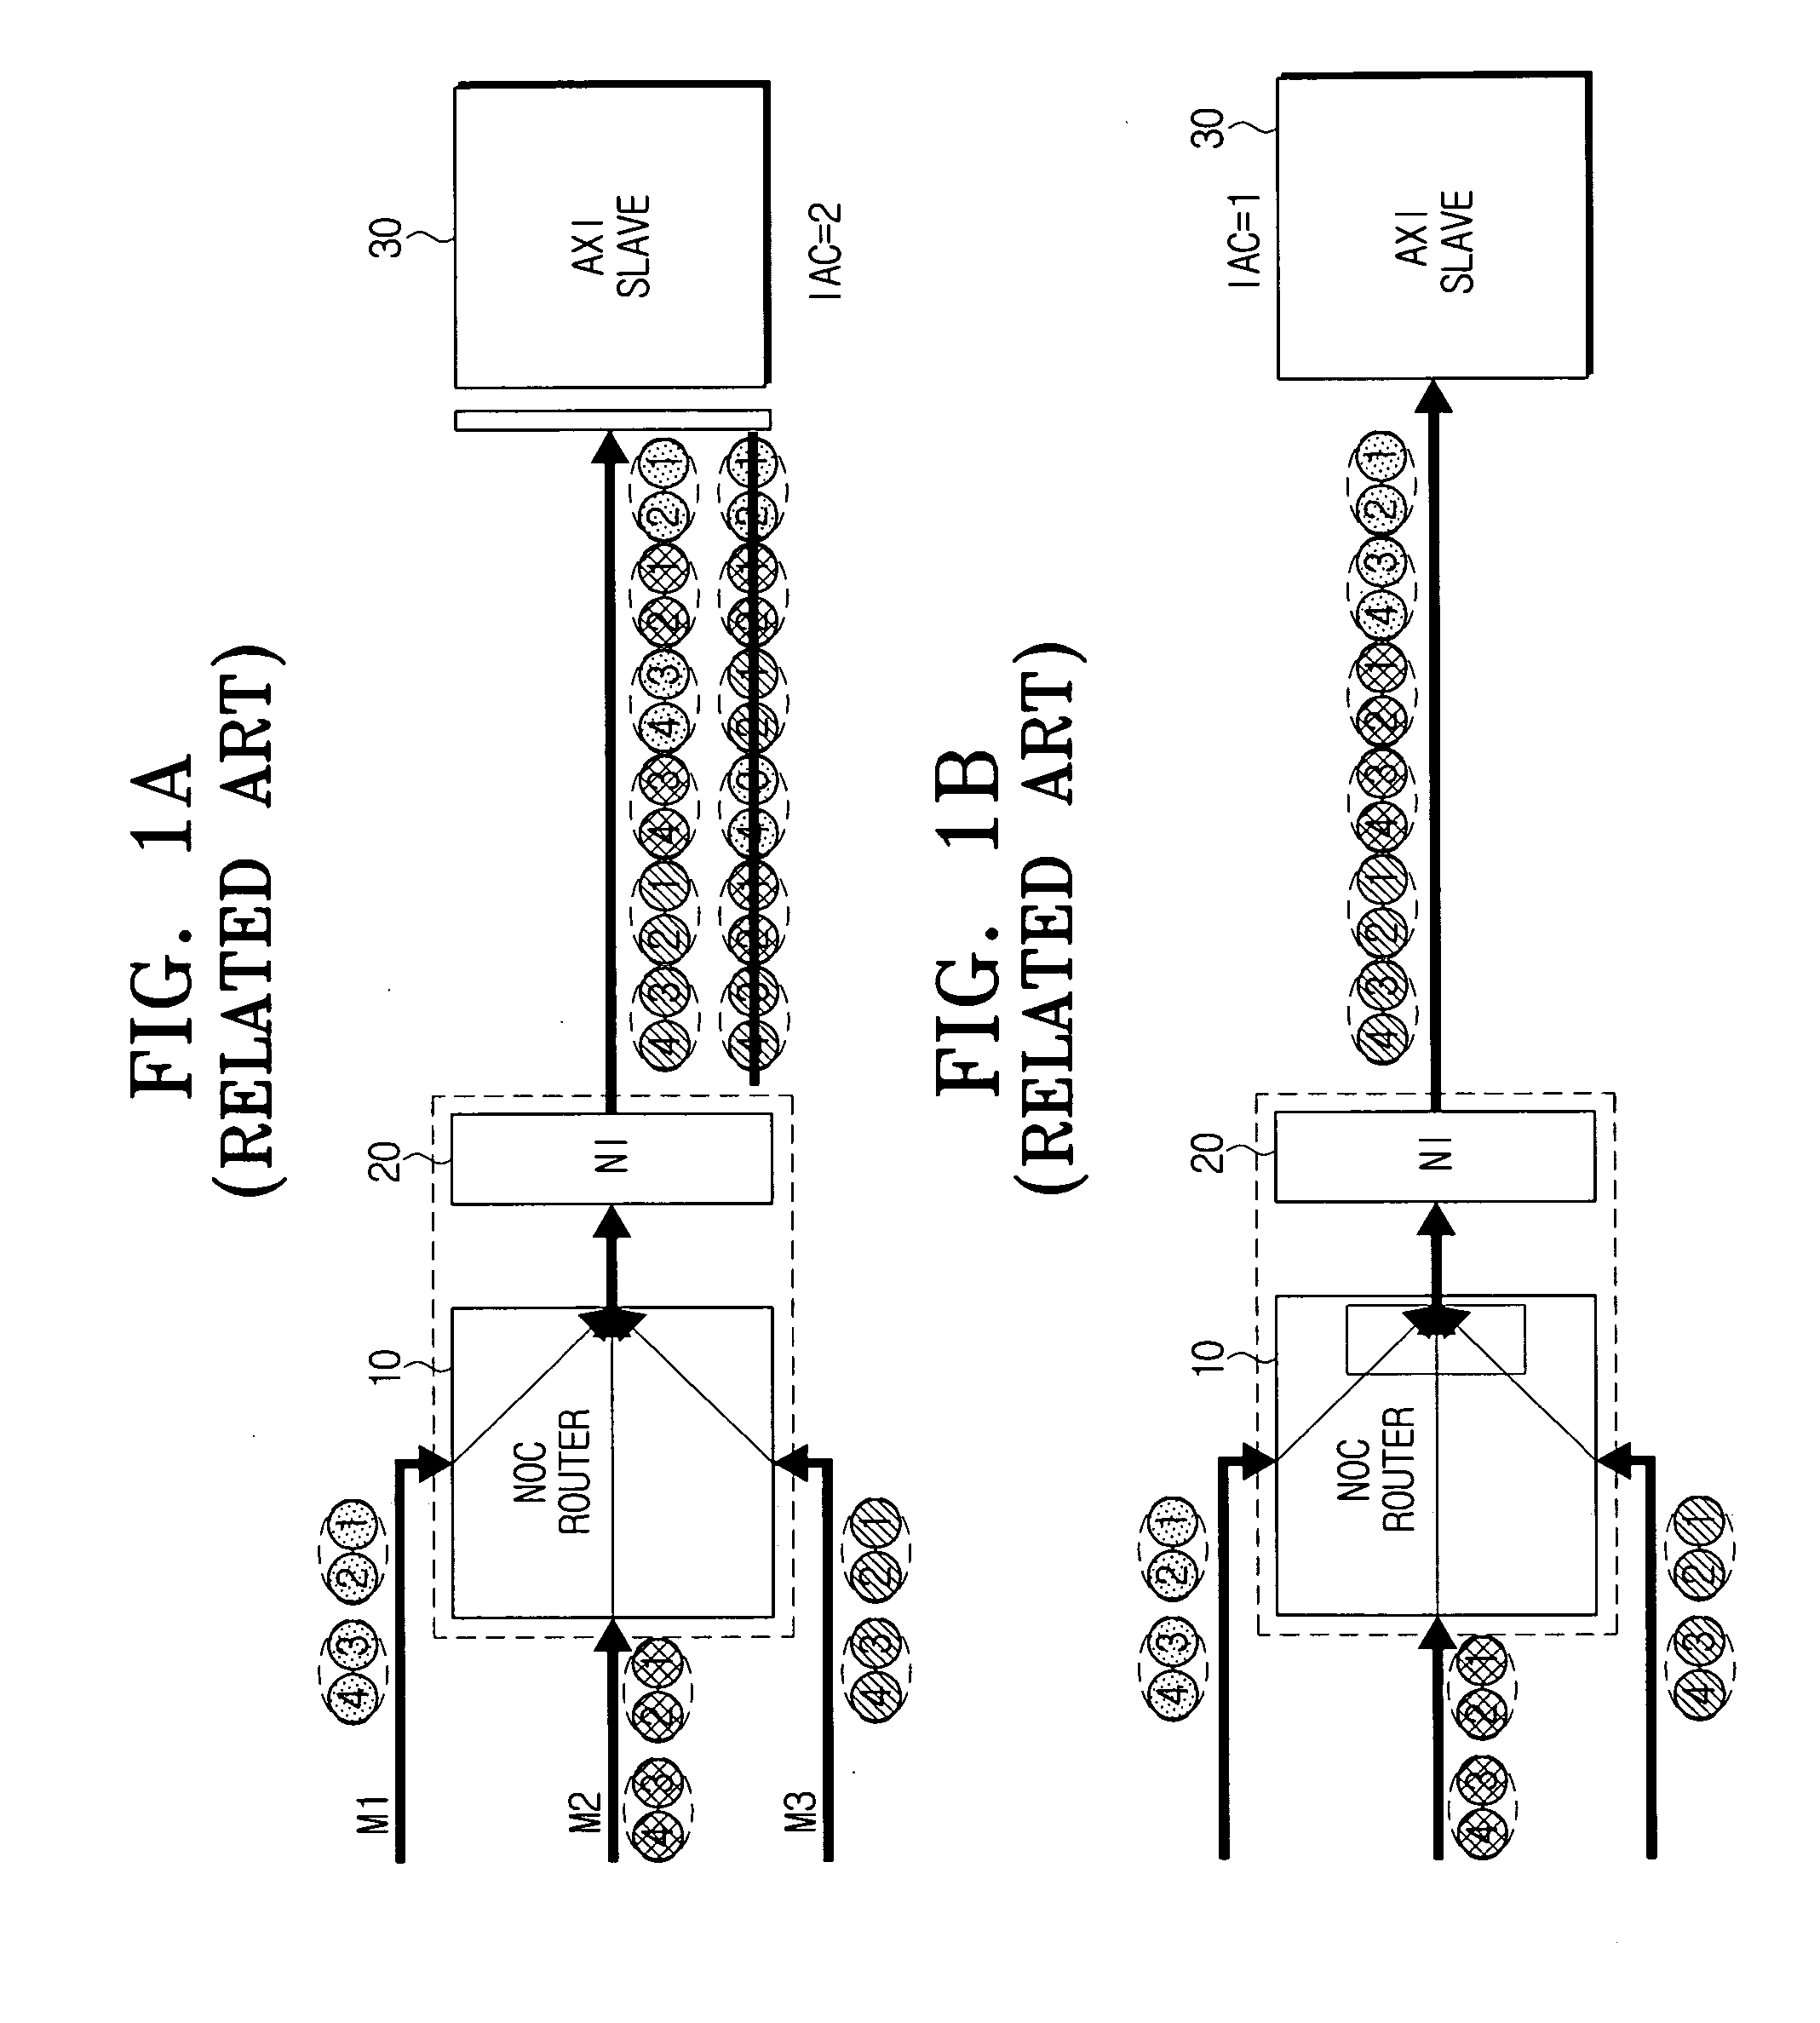 NoC system employing AXI protocol and interleaving method thereof